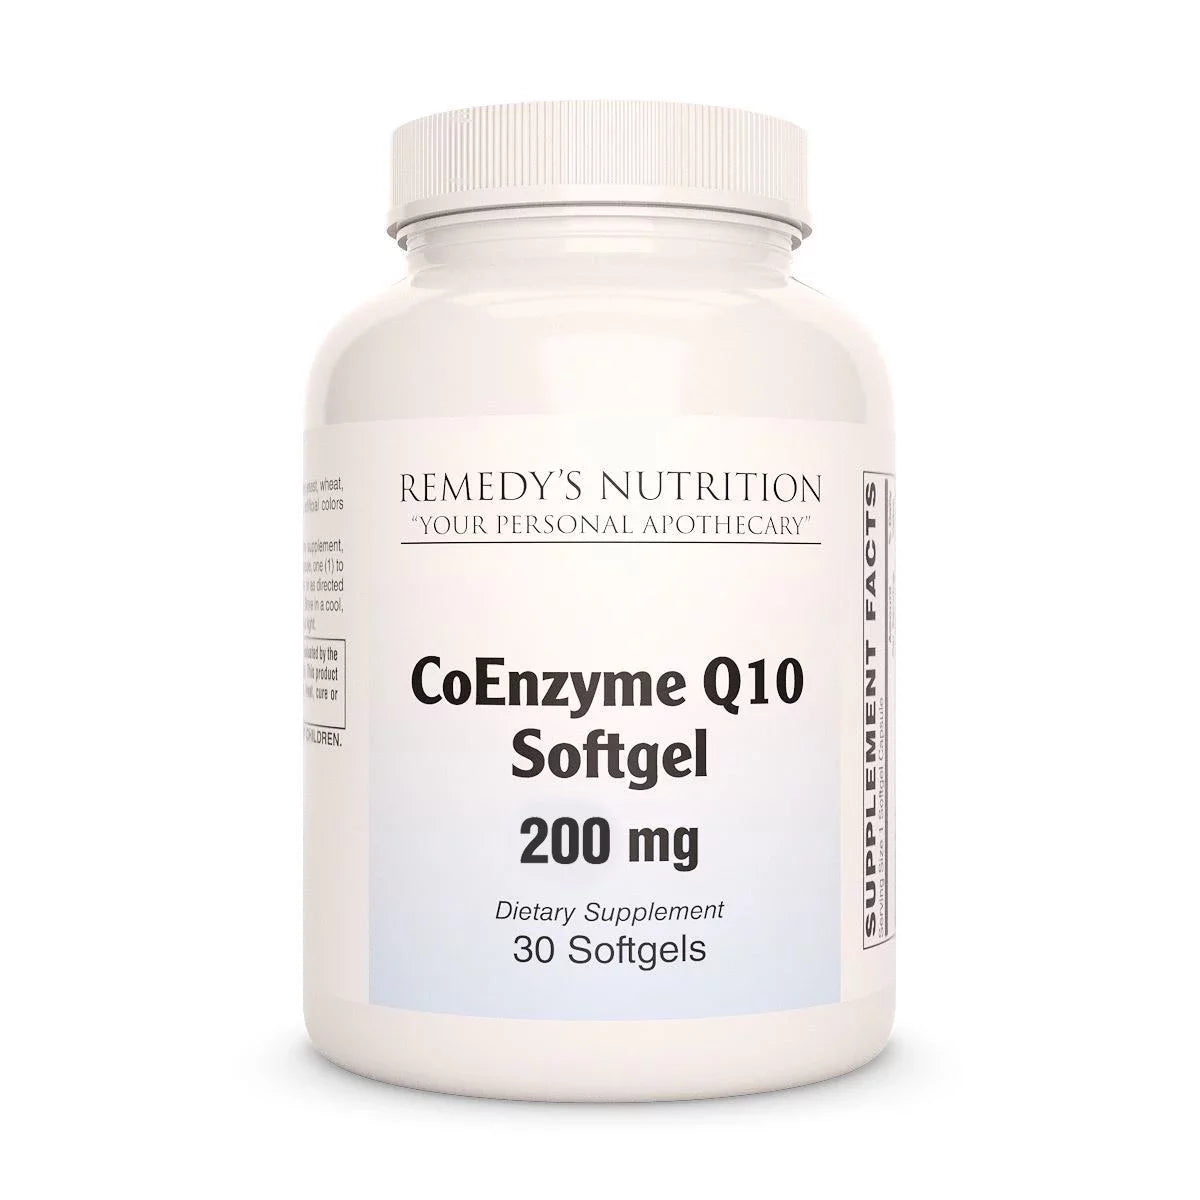 Image of Remedy's Nutrition® CoQ10 CoEnzyme Q10 Softgels Dietary Supplement front bottle.